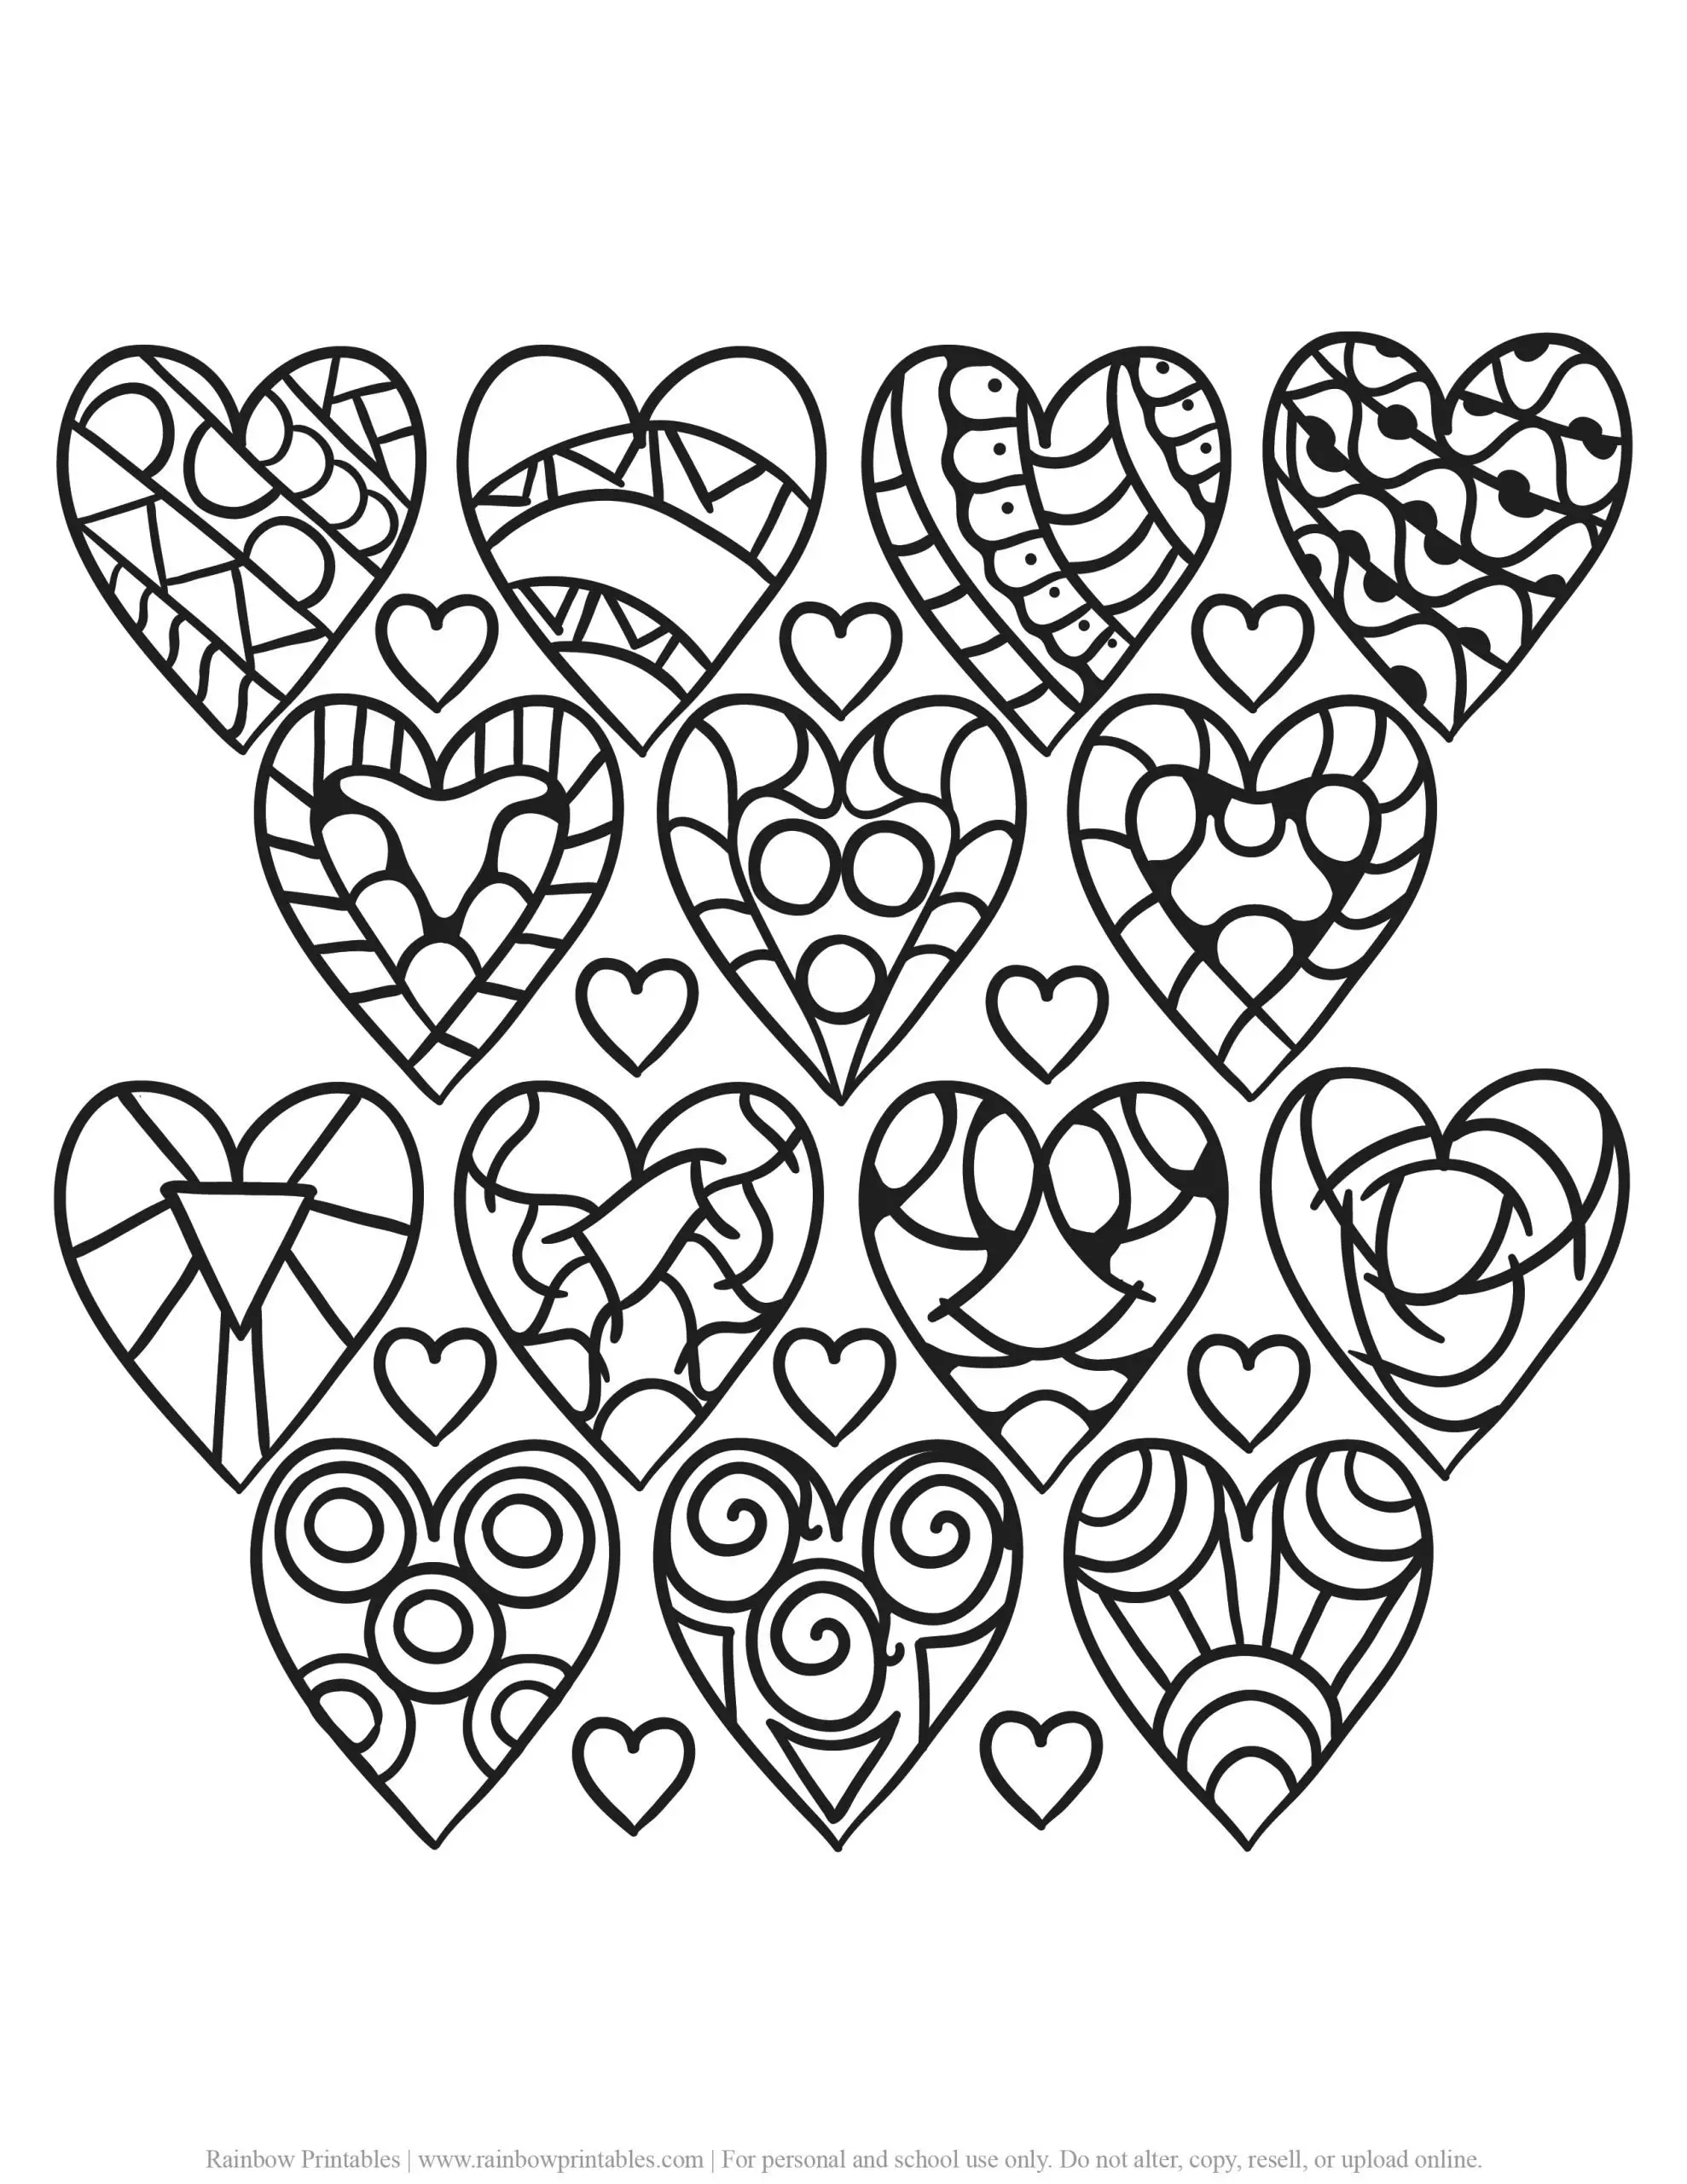 VDay Mandala & Pattern Coloring Pages for Adults